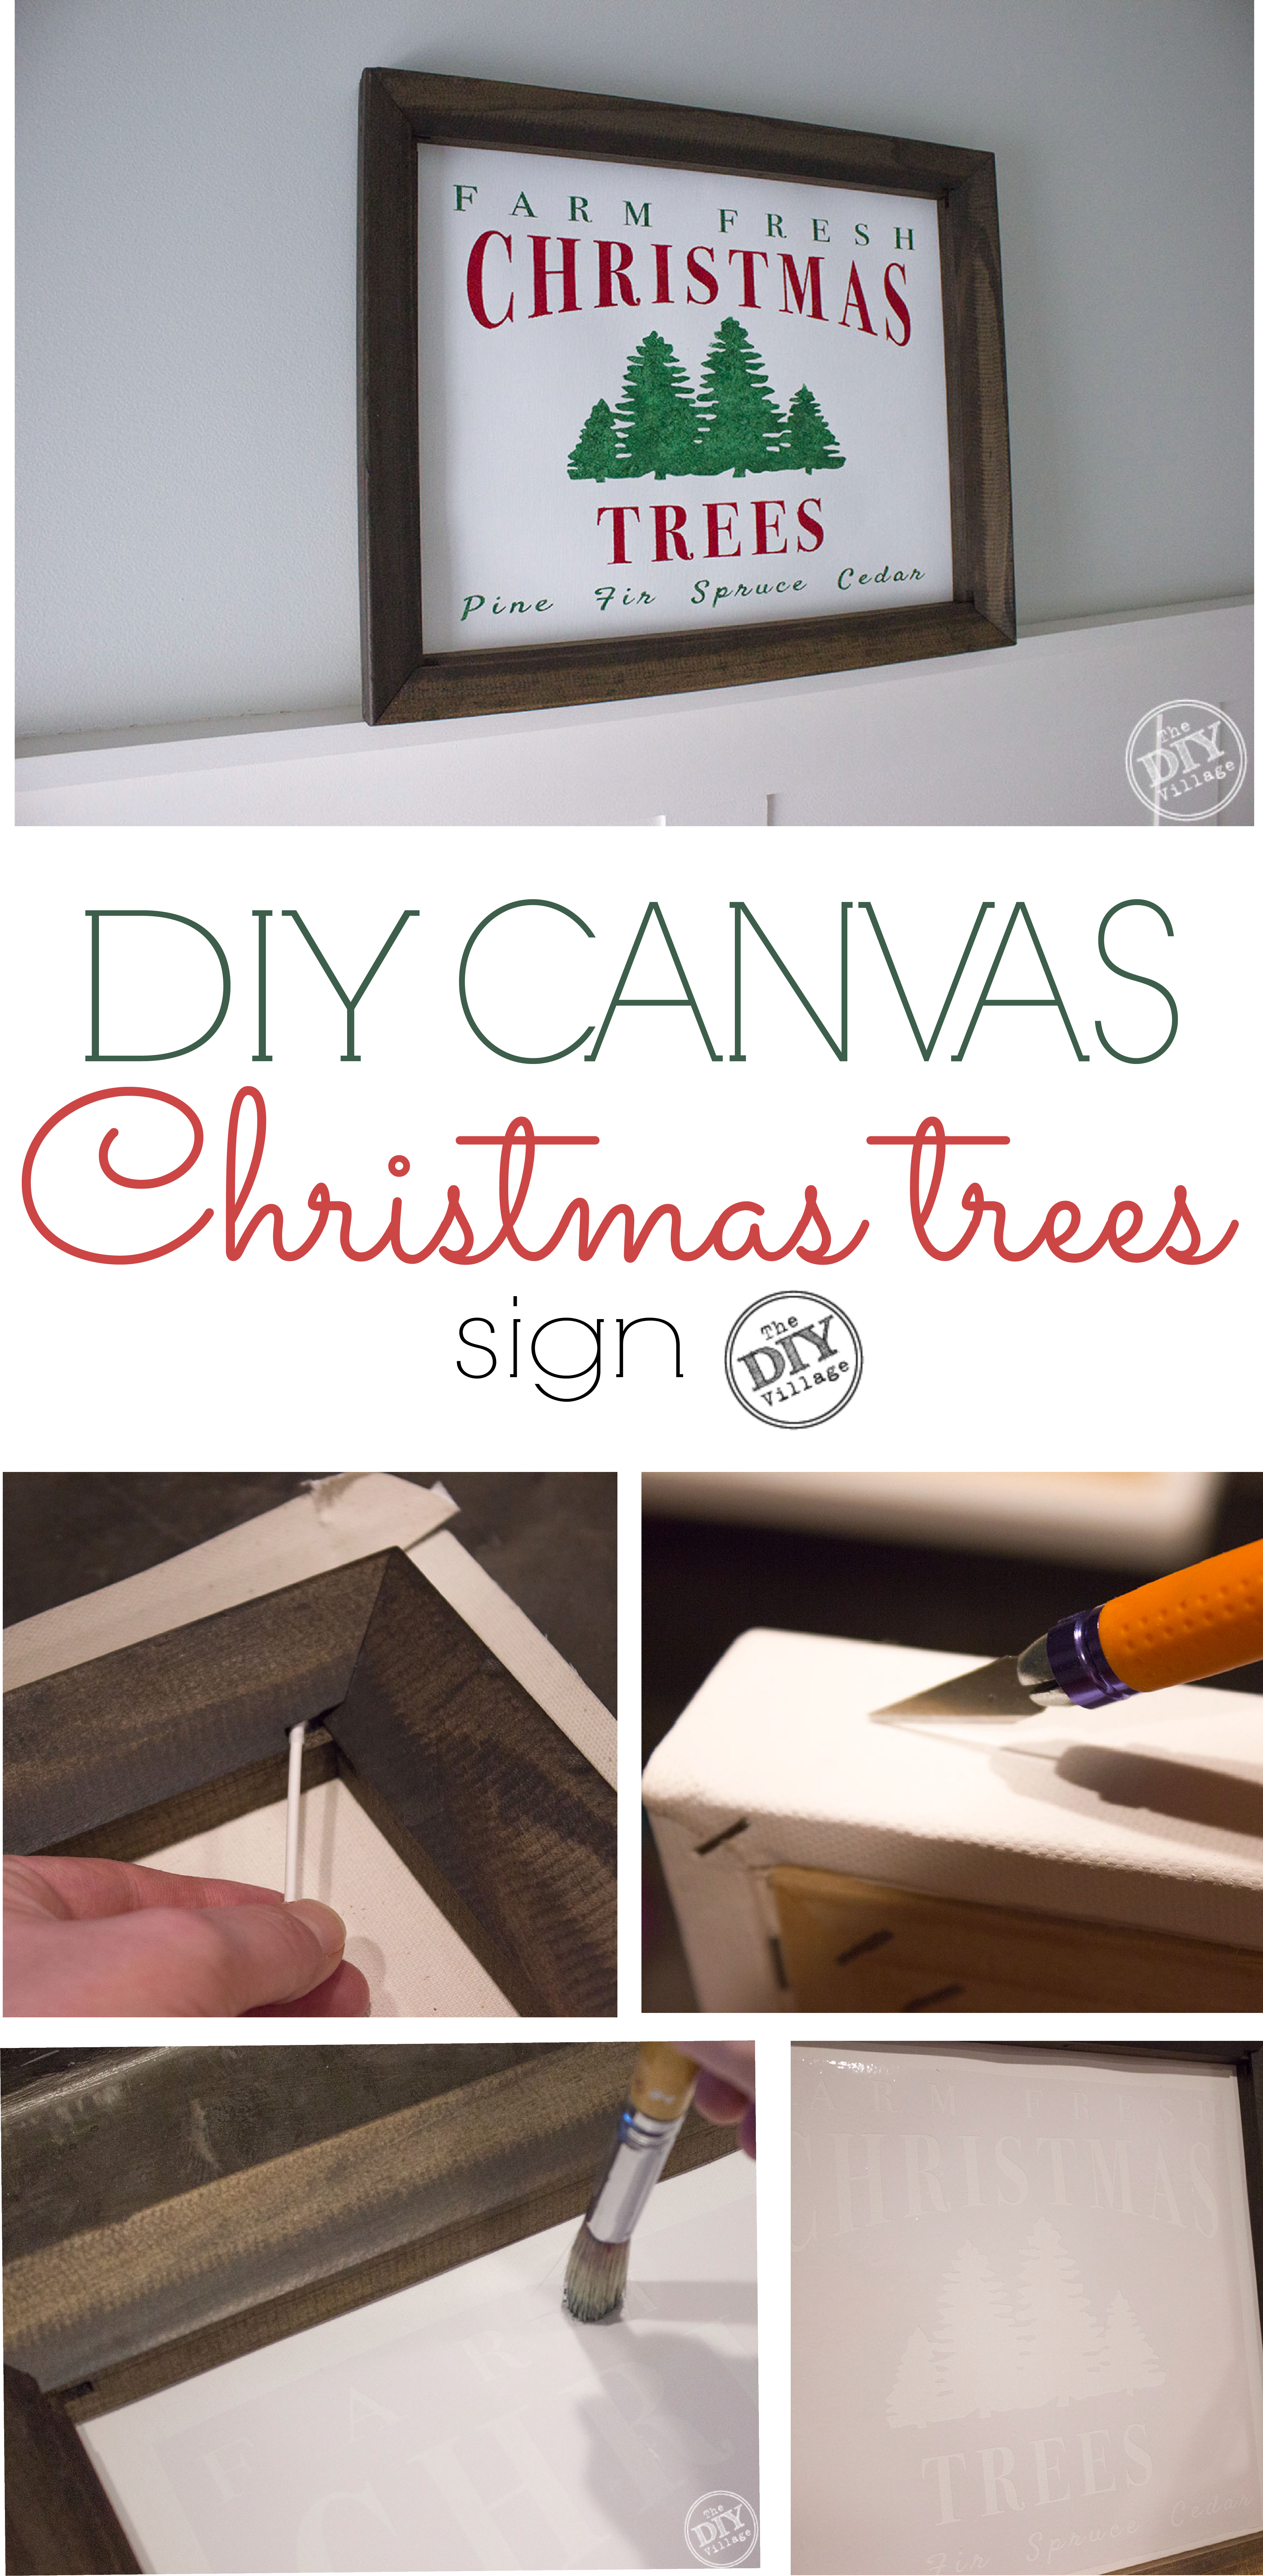 Creating your own framed canvas art has never been easier. Step by step process of how to create a custom DIY Farm Fresh Christmas Tree Sign